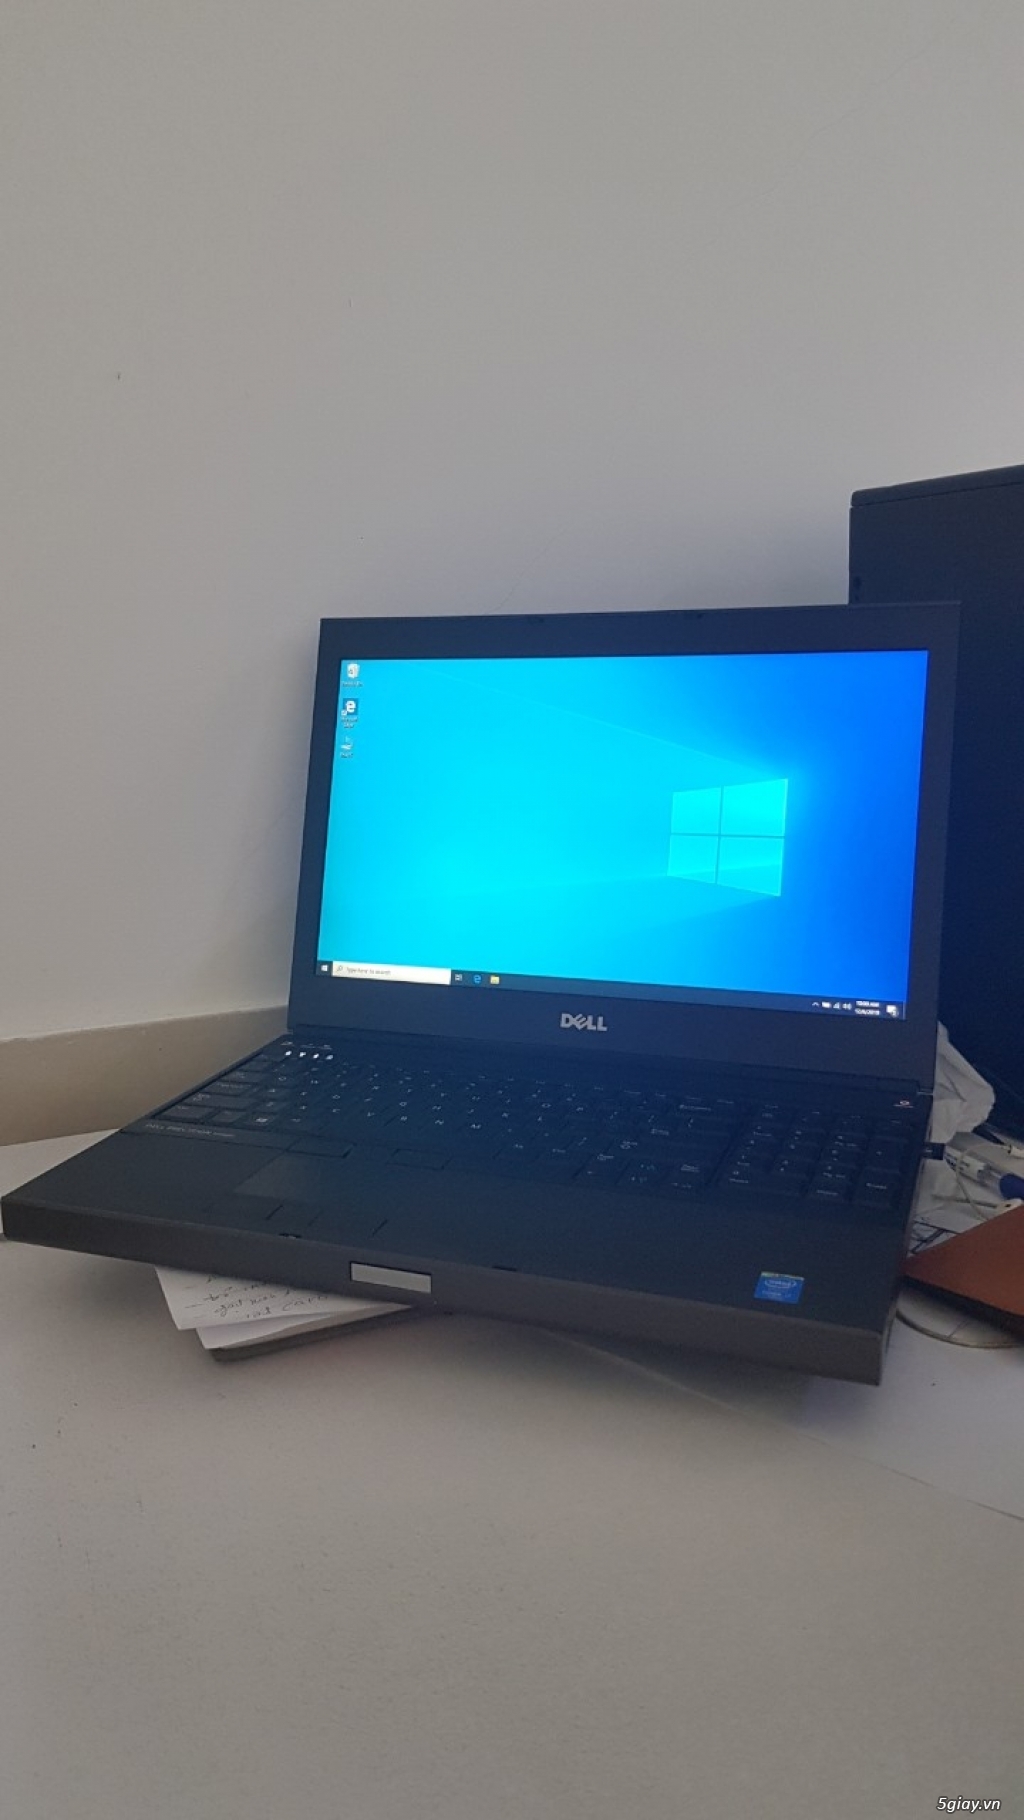 Dell M4800 Refurbished Grade A Date 2015 Like New - 3